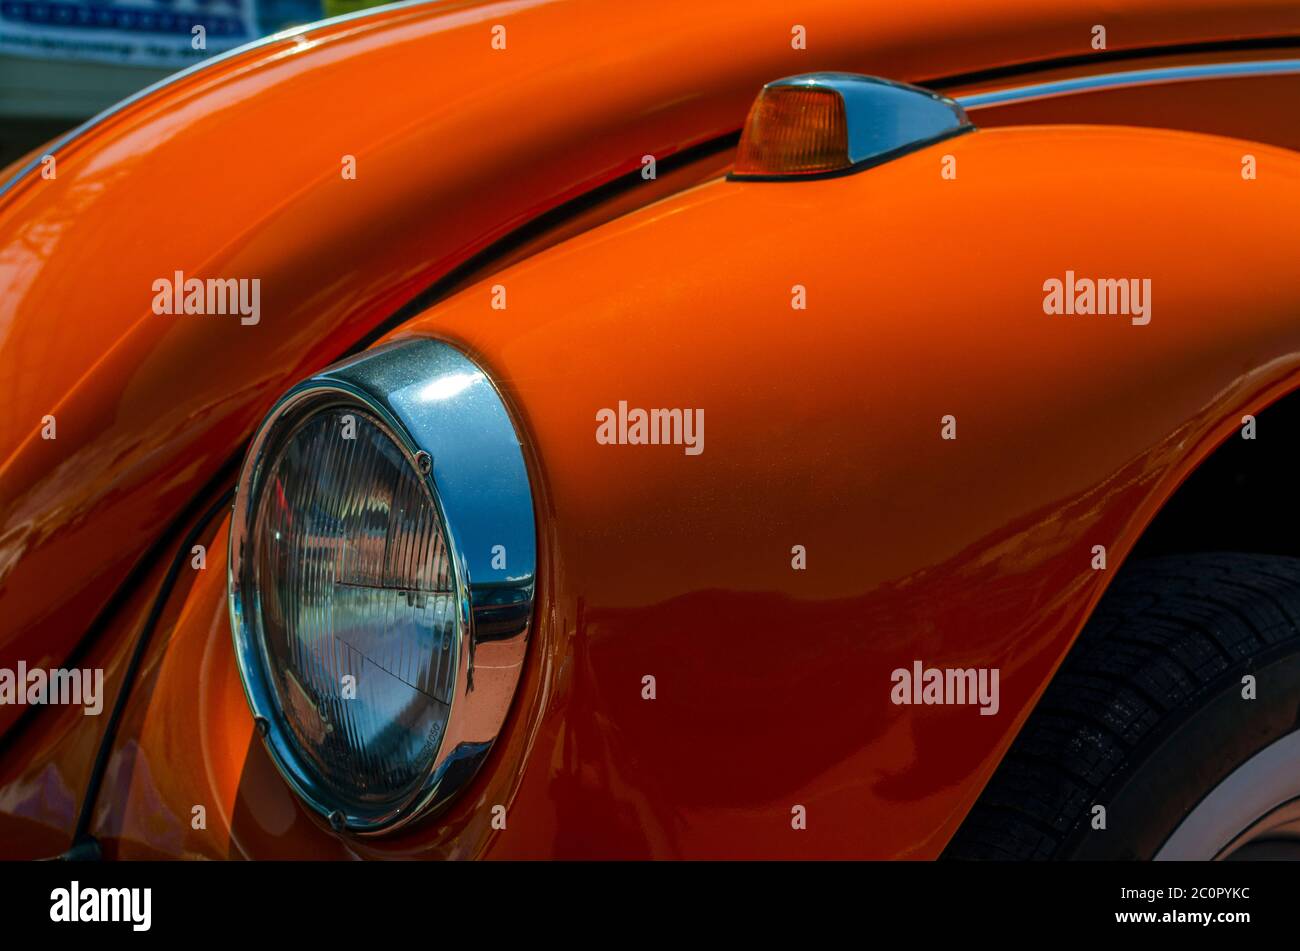 Heraklion, Crete / Greece. Close up detailed view of the front fender with the headlight and the turn signal light of an orange Volkswagen Beetle Stock Photo